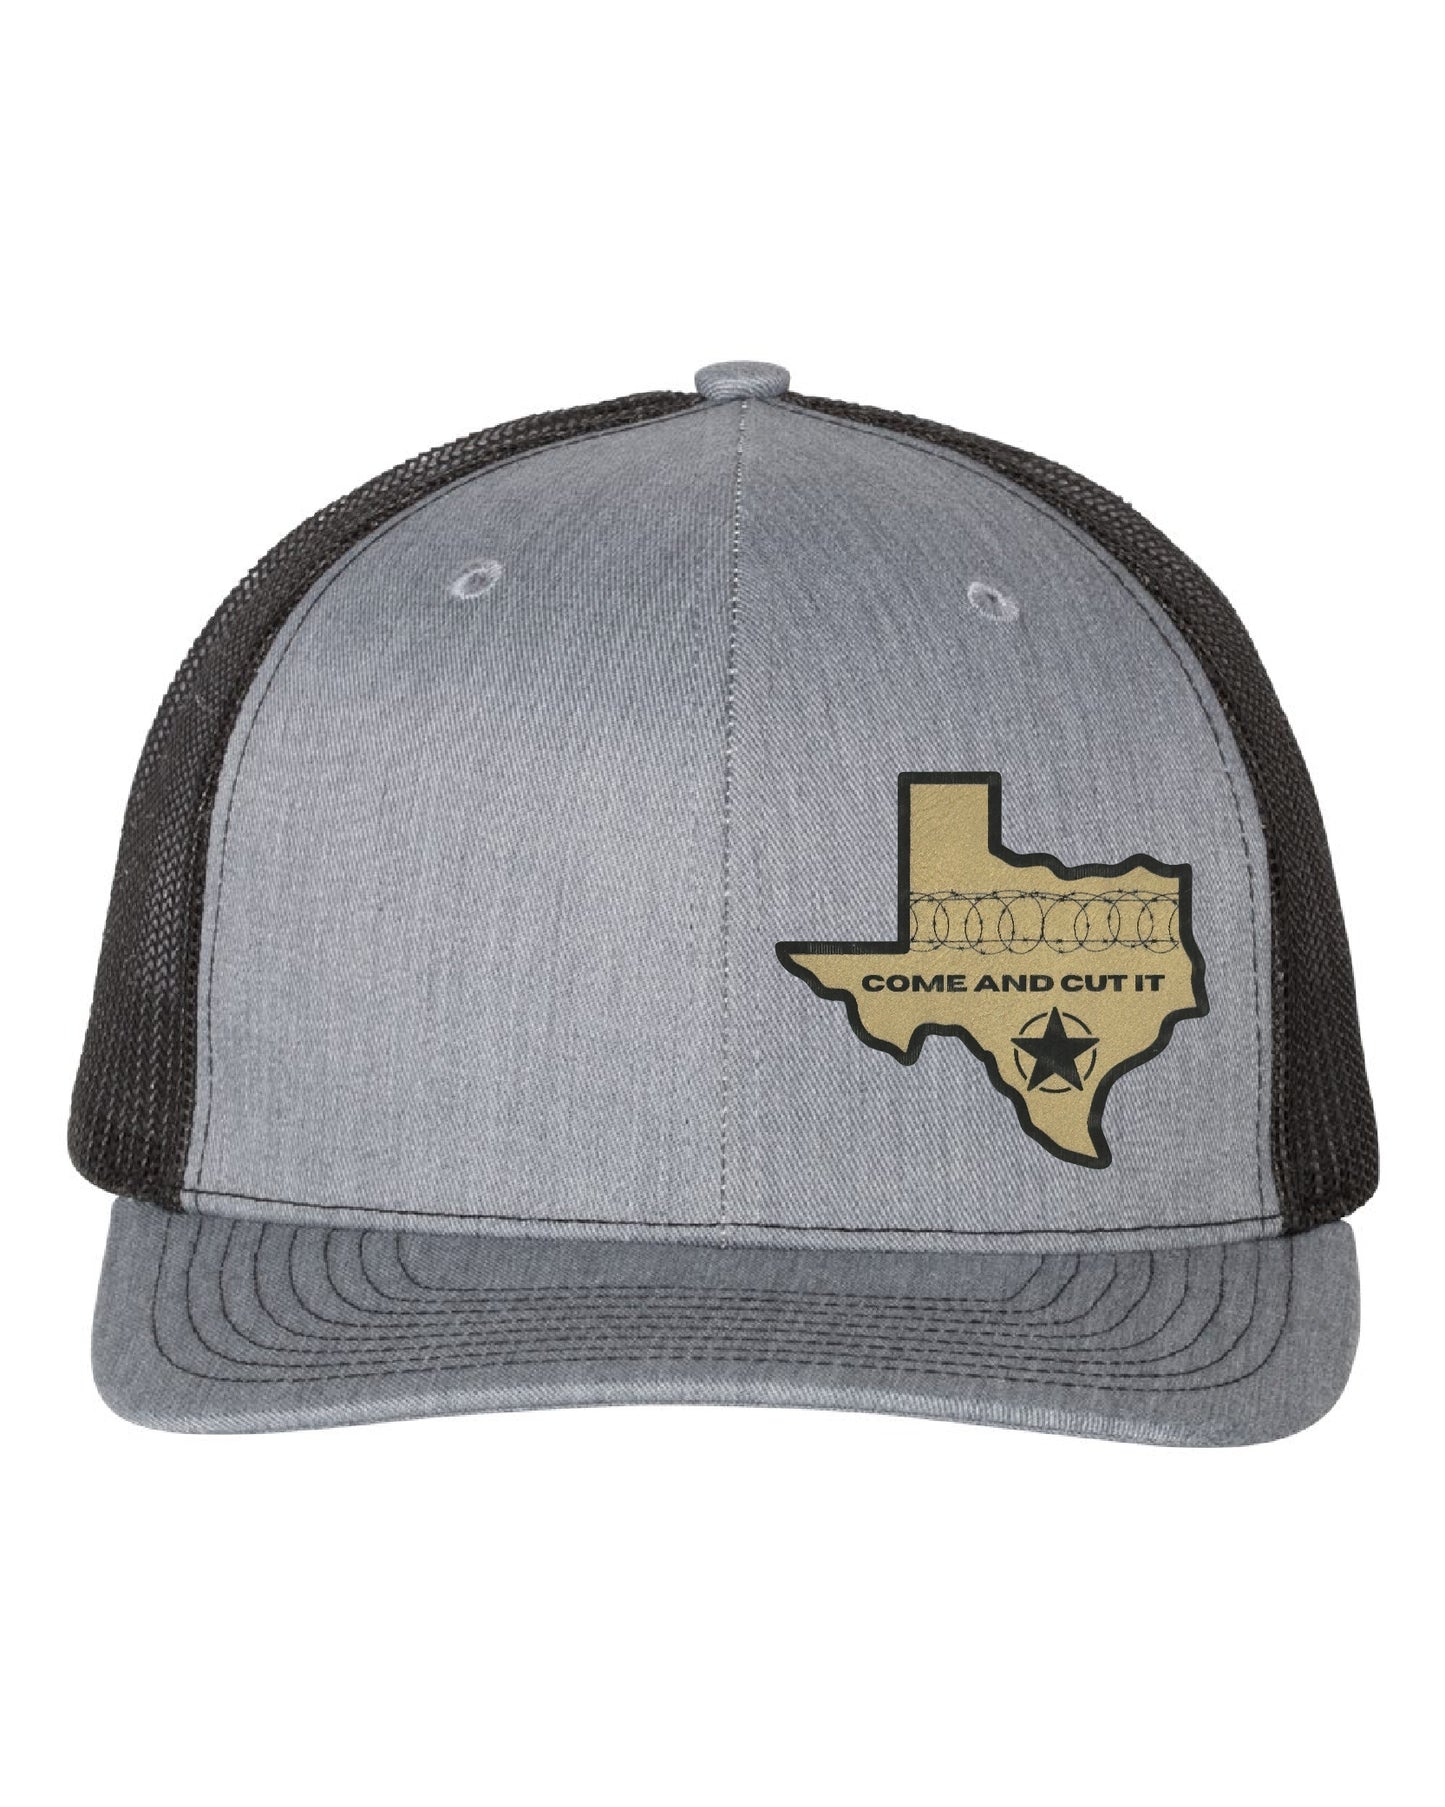 Texas Come And Cut It, Patriotic, Snapback, Richardson 112, Laser Engraved Leather, Gift for him or her